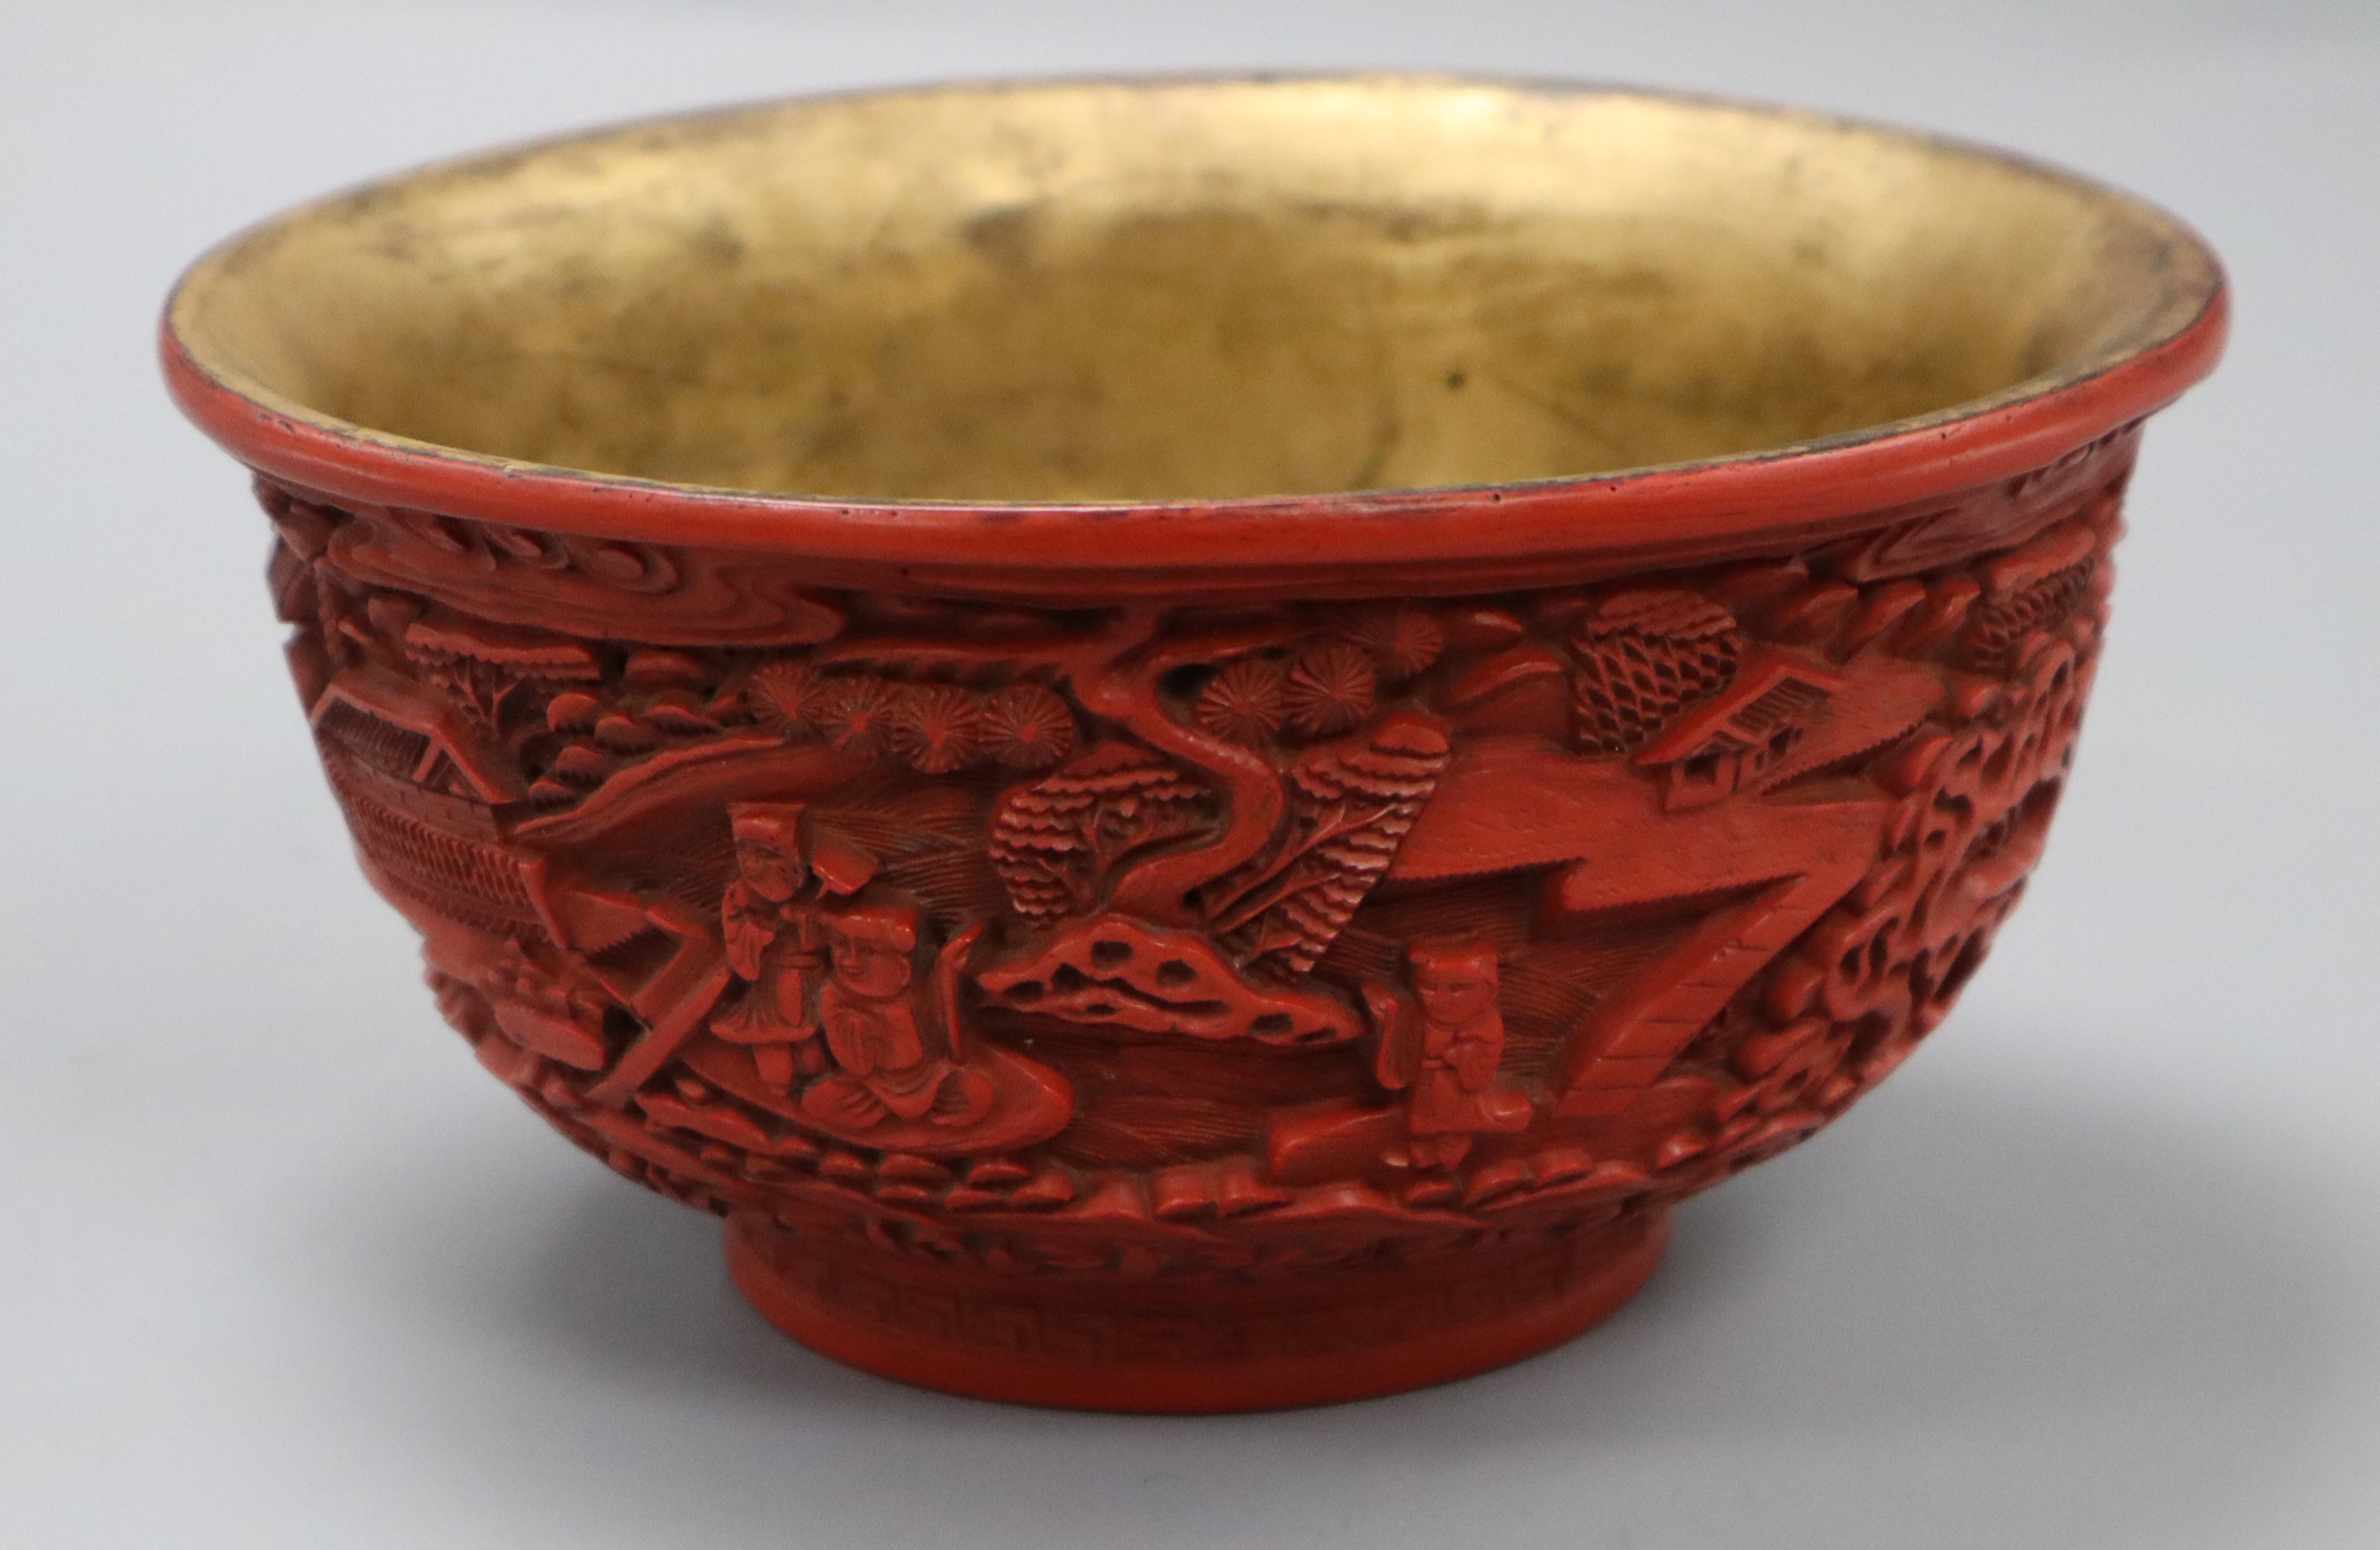 A red lacquer bowl